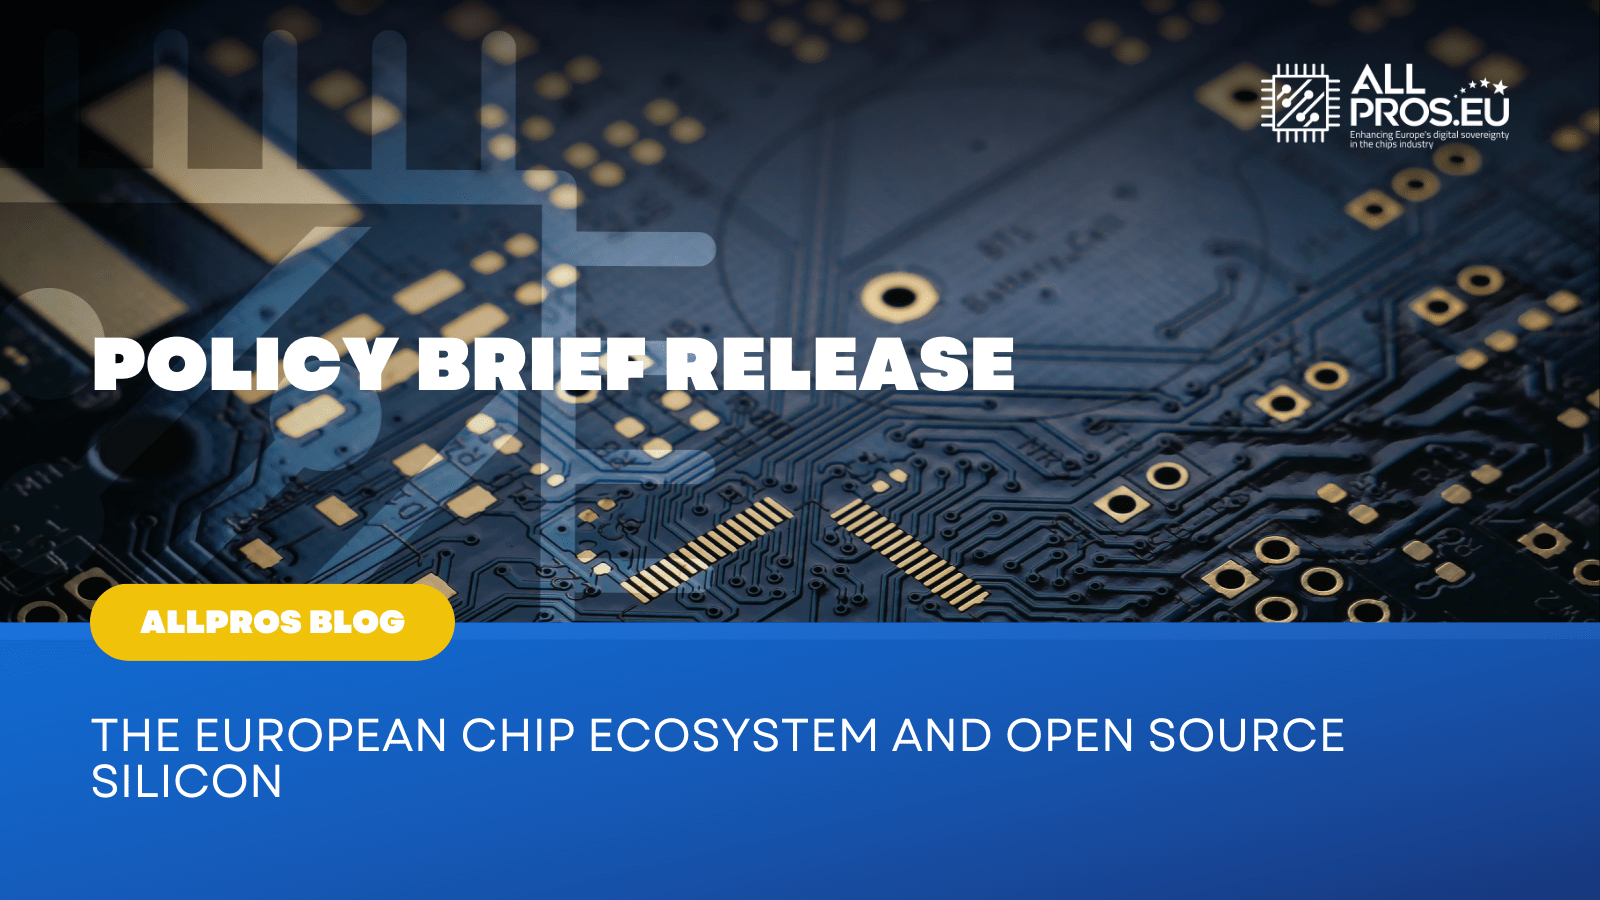 Policy Brief release: The European Chip Ecosystem and Open Source Silicon